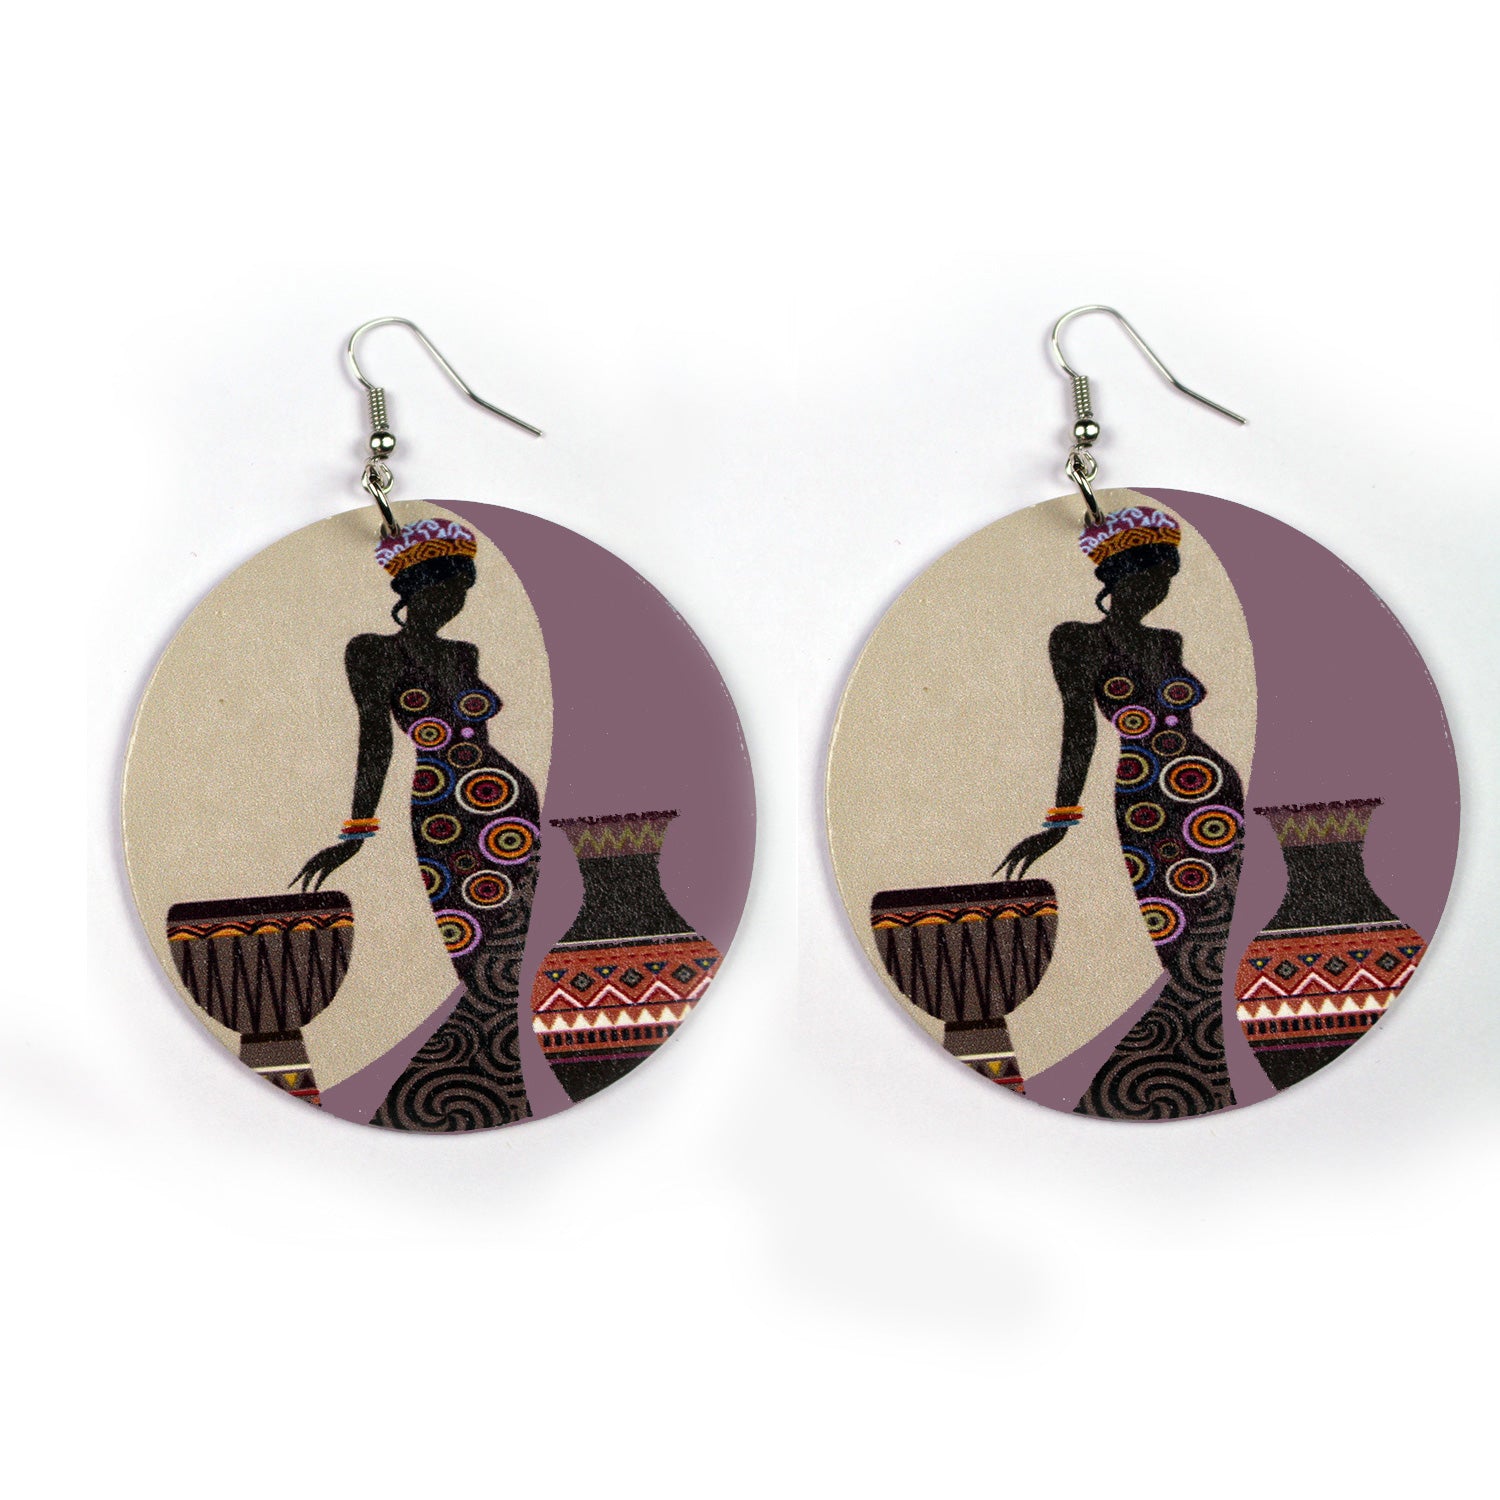 Large wooden Ethnic drop earrings | The woman and two pots